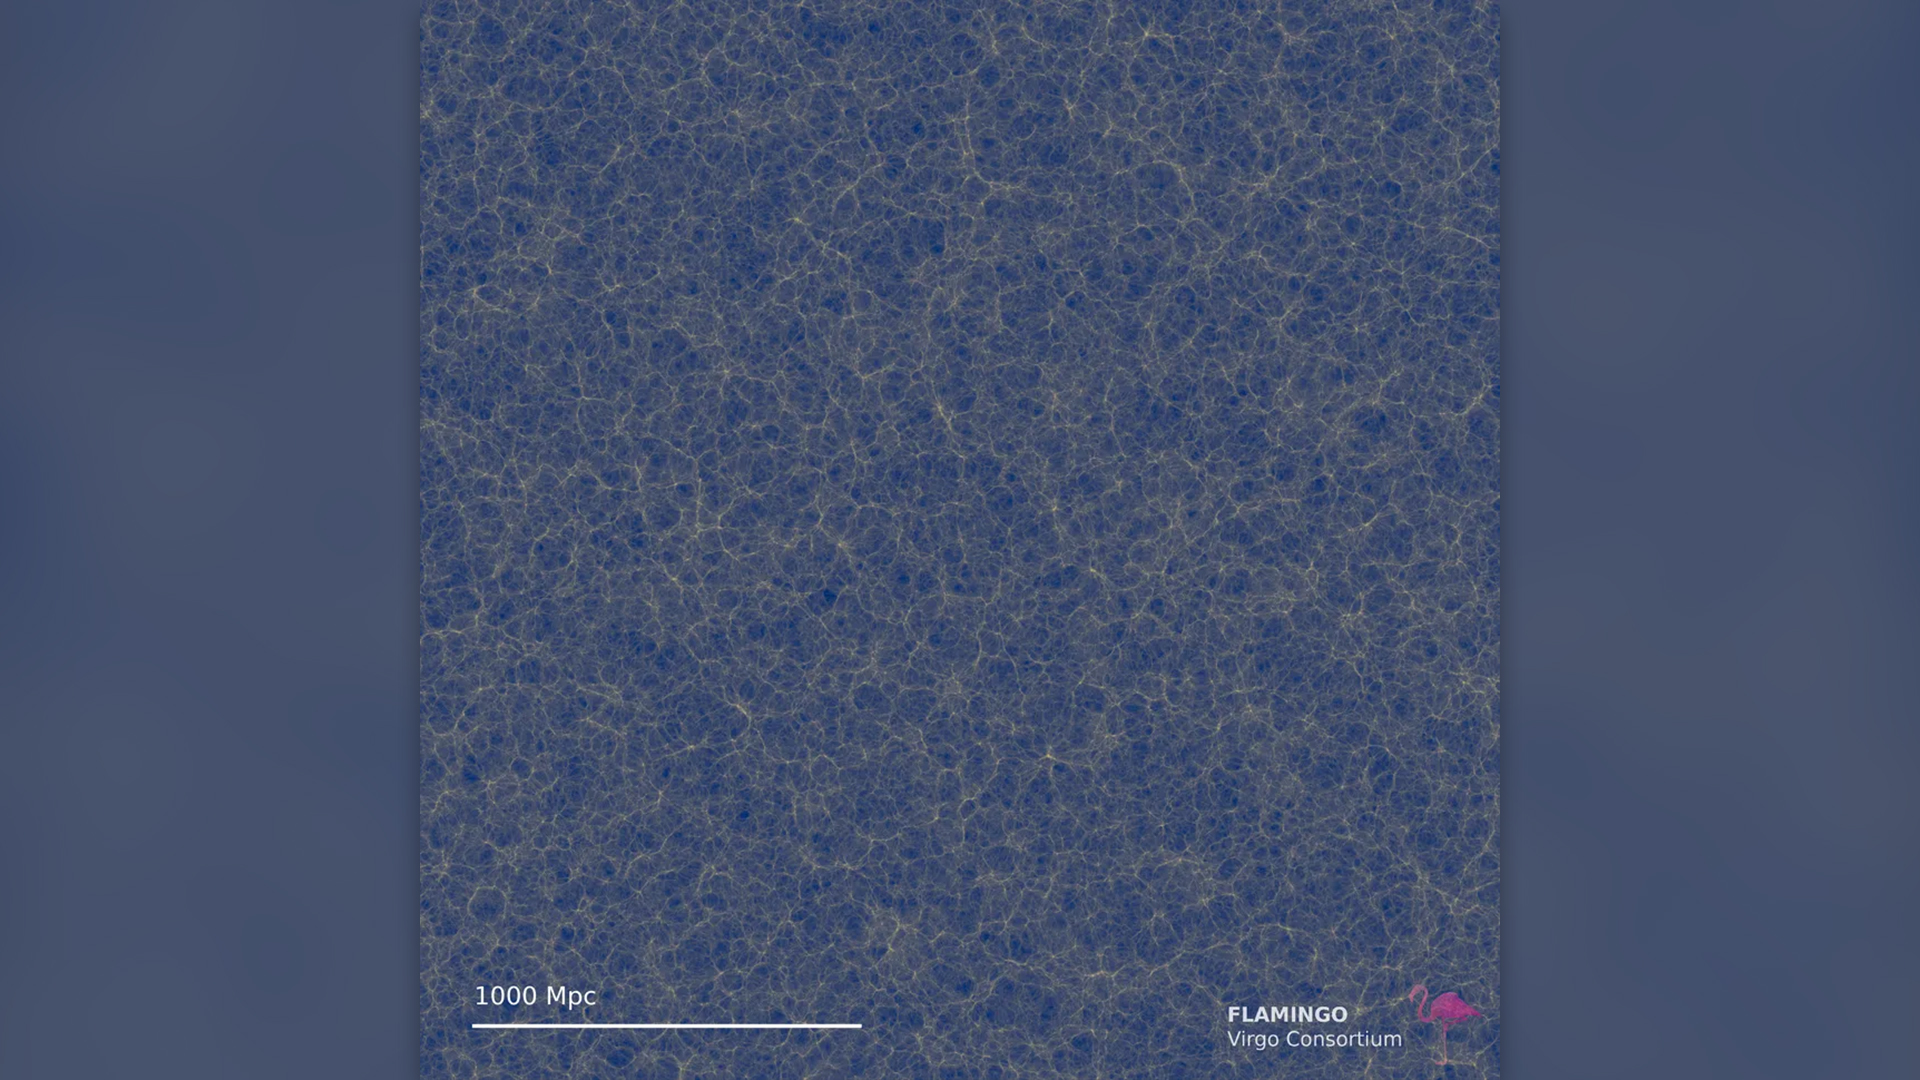 Gpc box showing quantity of CDM (dark matter surface density) in a logarithmic color scale to visualise faint structures.